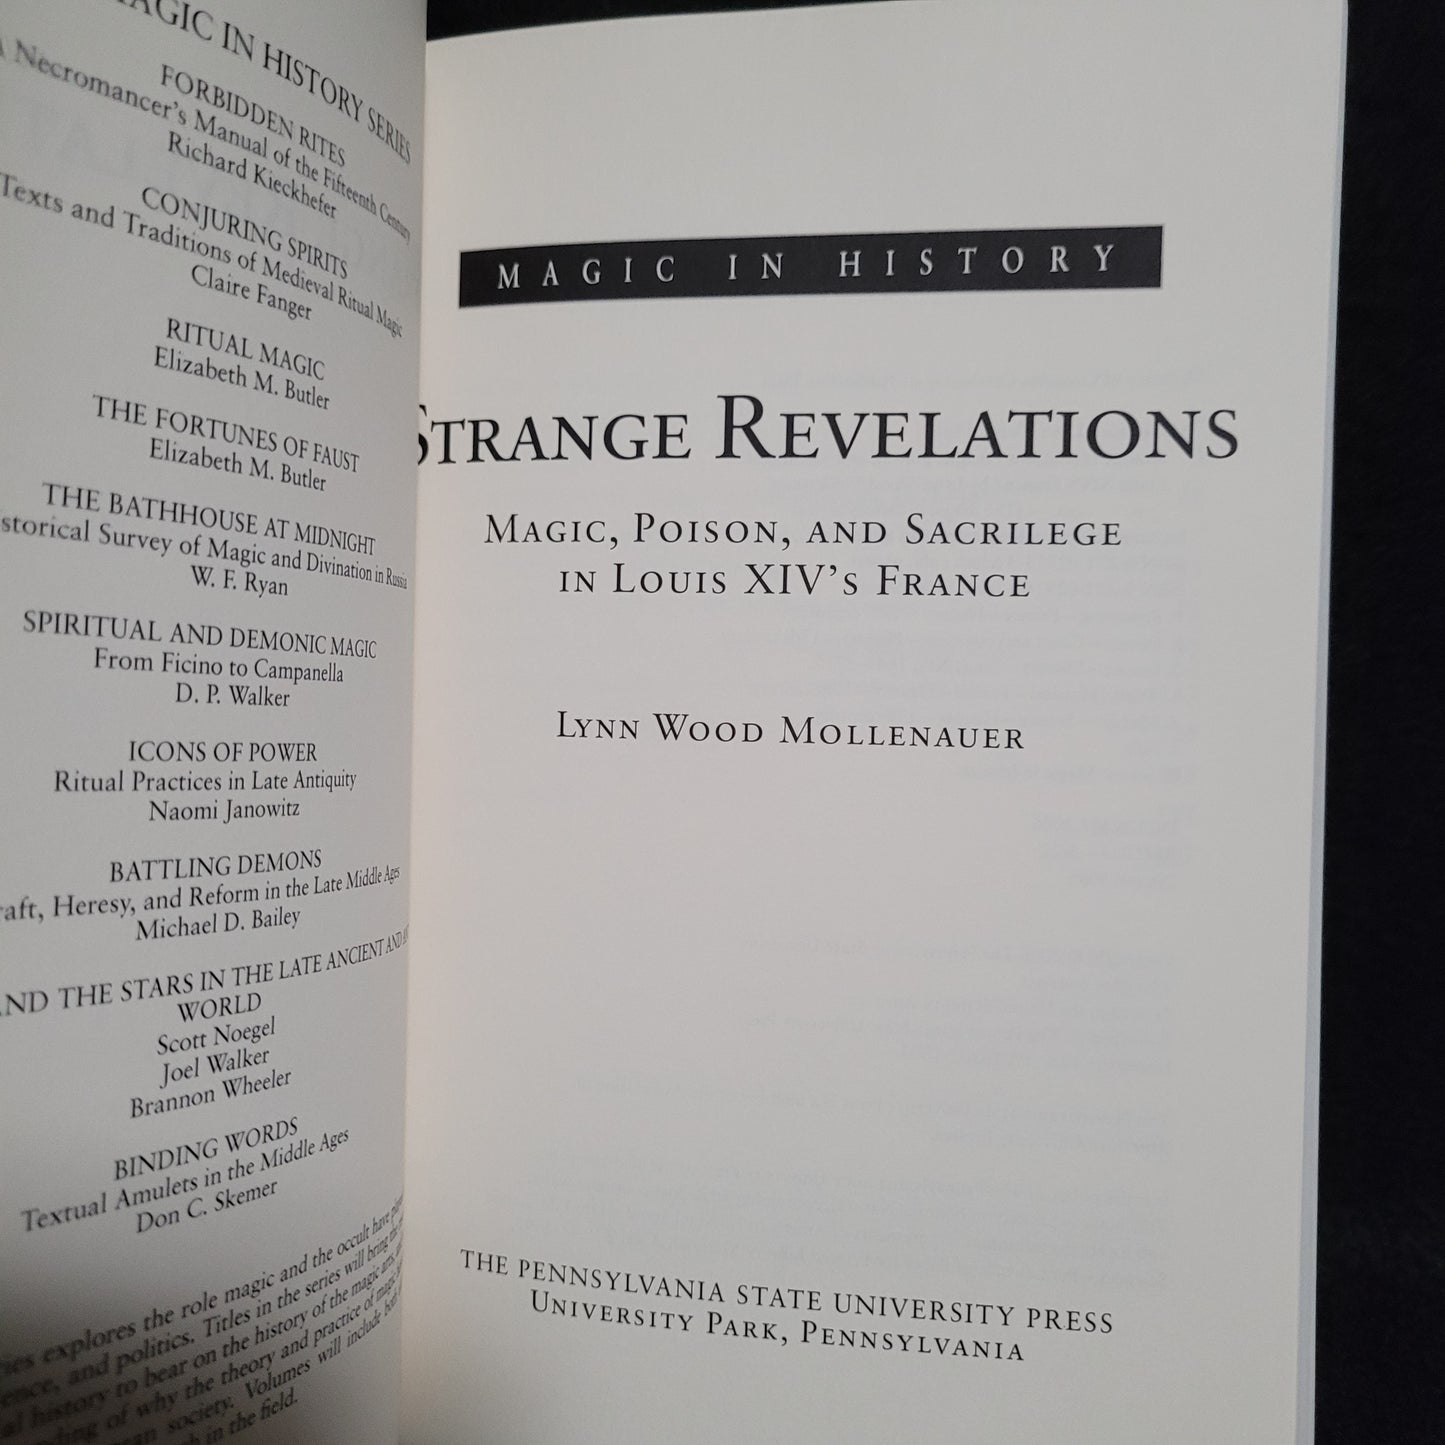 Strange Revelations: Magic, Poison, and Sacrilege in Louis XIV's France by Lynn Wood Mollenauer (Penn State University Press, 2006) Paperback